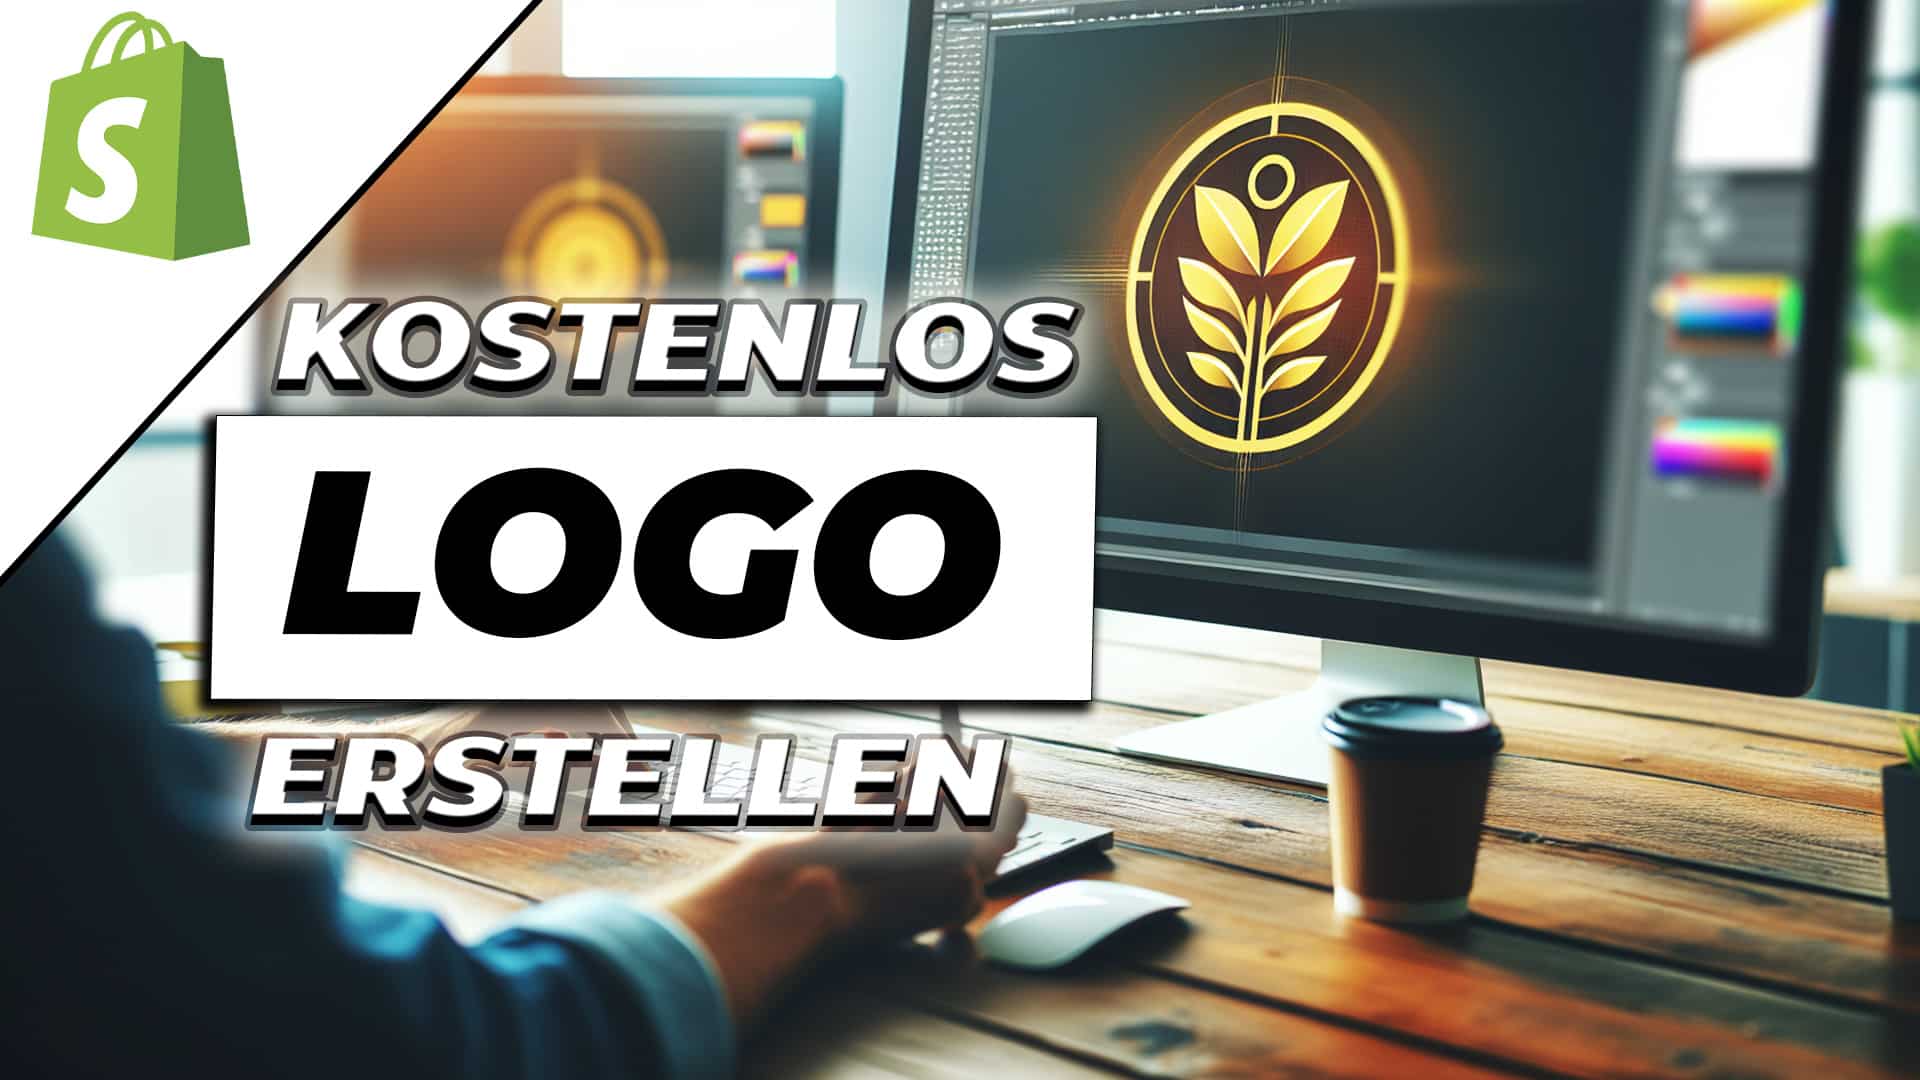 Create a free logo – for your Shopify store